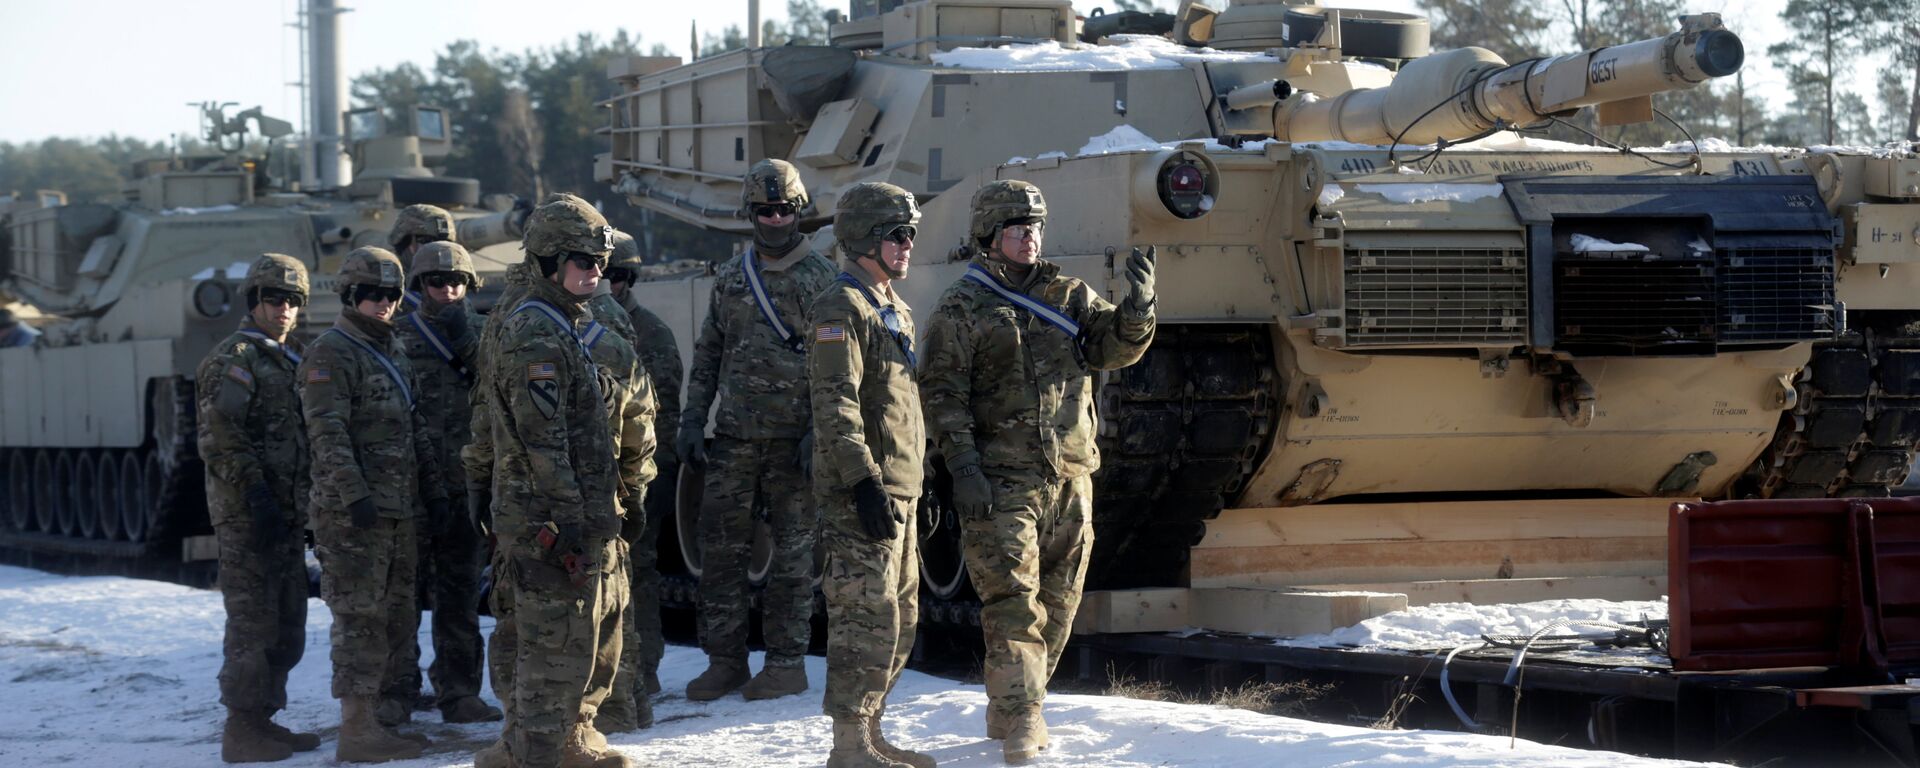 U.S. soldiers stand next to the M1 Abrams tanks that will be deployed in Latvia for NATO's Operation Atlantic Resolve in Garkalne, Latvia February 8, 2017 - Sputnik International, 1920, 12.01.2022